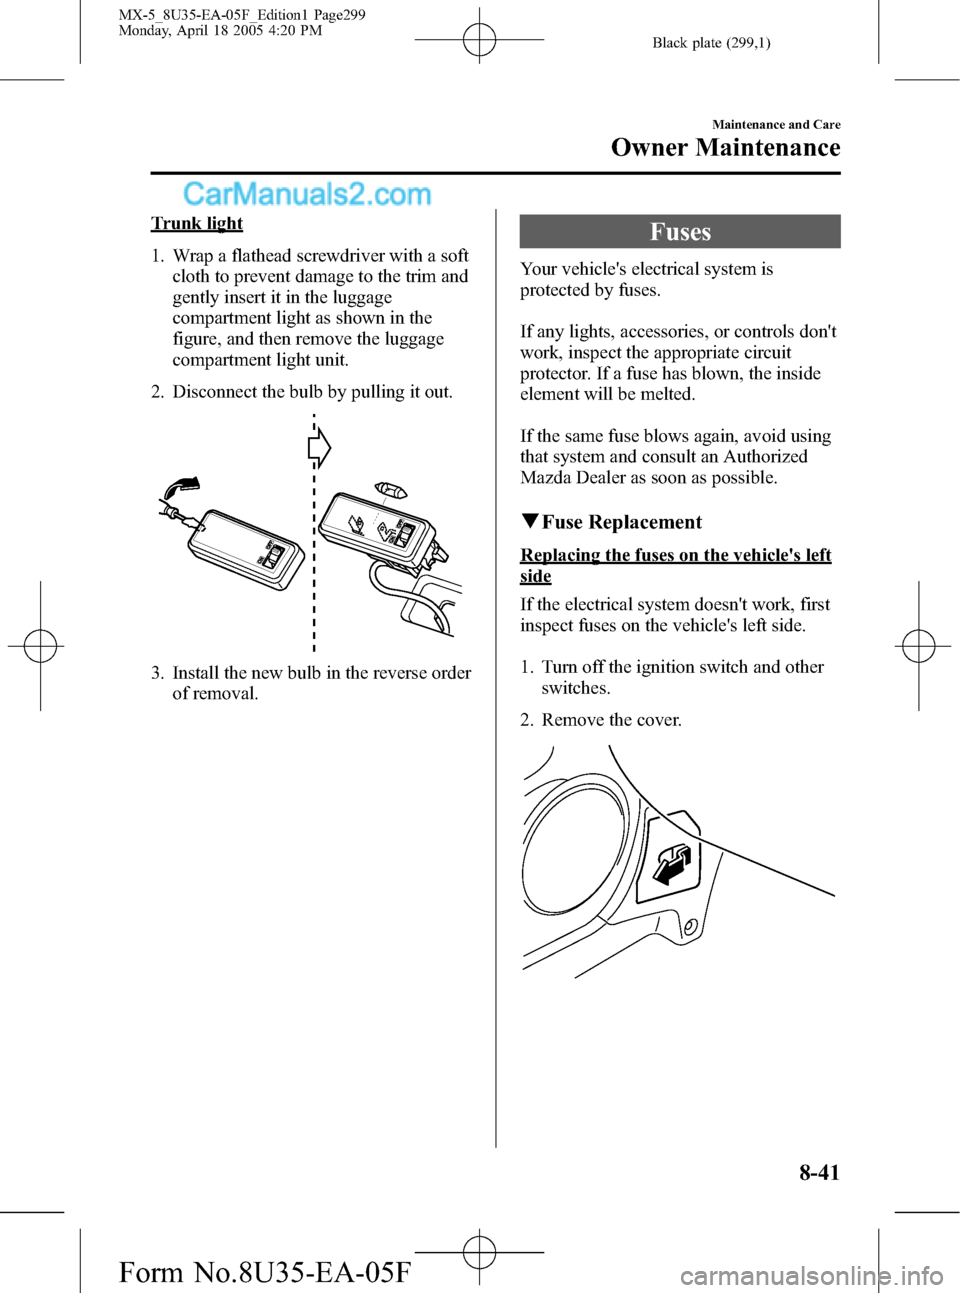 MAZDA MODEL MX-5 2006  Owners Manual (in English) Black plate (299,1)
Trunk light
1. Wrap a flathead screwdriver with a soft
cloth to prevent damage to the trim and
gently insert it in the luggage
compartment light as shown in the
figure, and then re